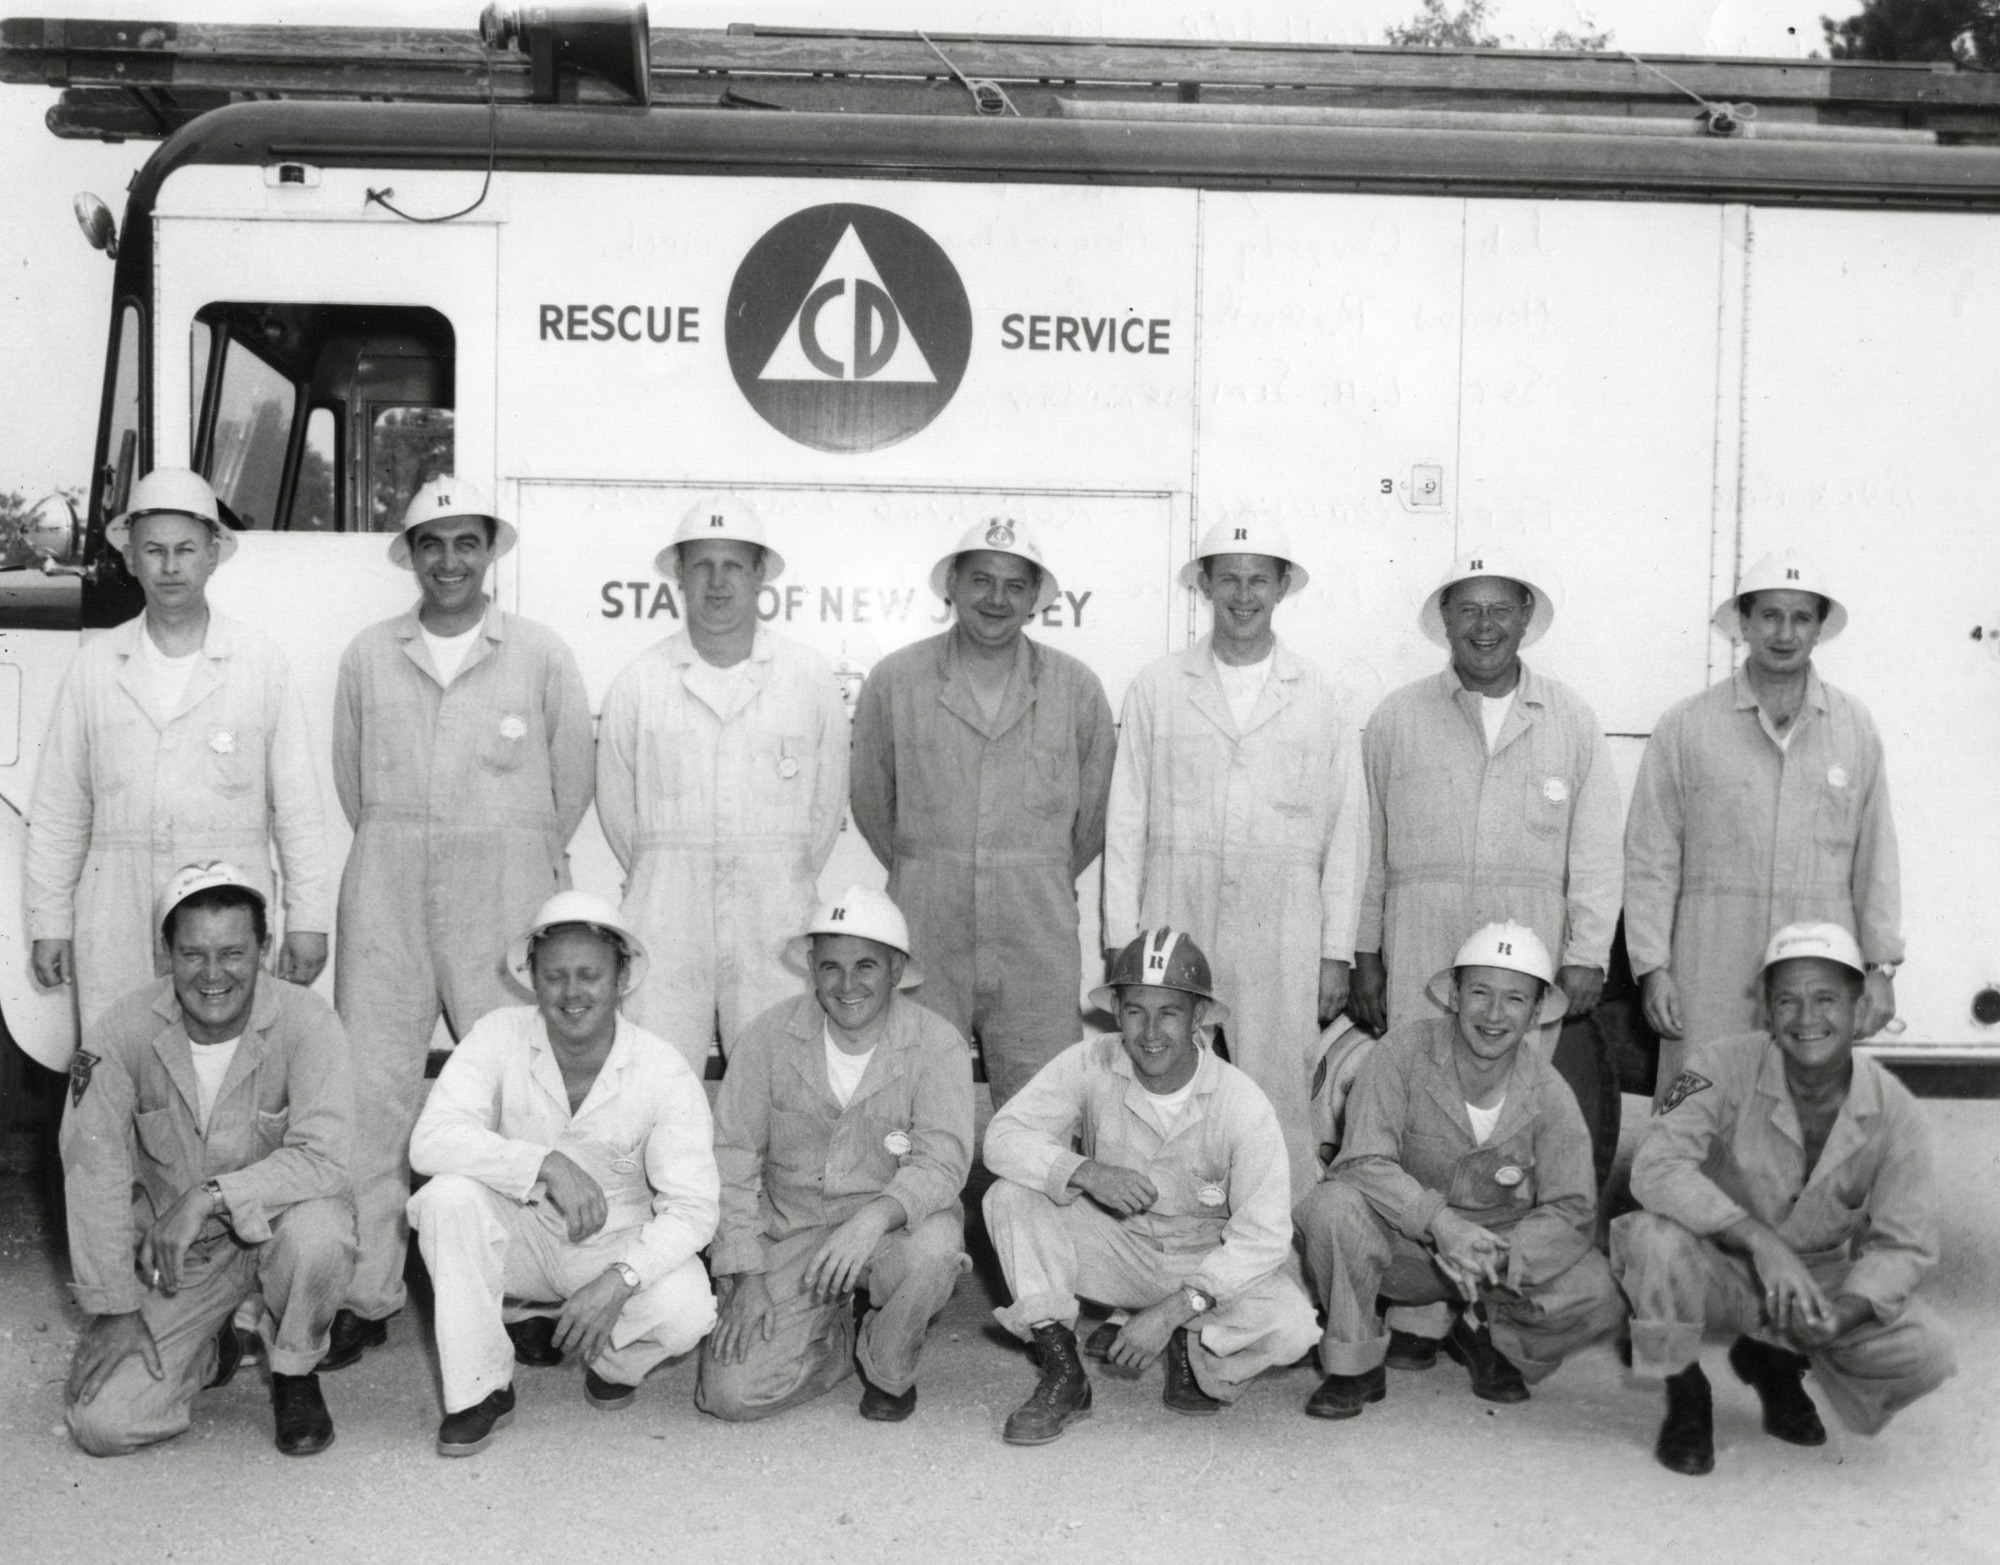 As part of some kind of civil service, RCA sent my father and other employees to Hammonton, New Jersey in June, 1959 to take a course in Heavy Rescue that was put on by the State of New Jersey Division of Civil Defense and Disaster Control. The back of this photo lists the names of each of these men and their jobs. One is Assistant Chief Ray Dobbs of the Collingswood Fire Company, two are foremen from RCA’s Camden, NJ plant. Tony DiMaggio (standing, far right) was with the Camden police. My father is on the bottom row, next to the last position, if you count the far left as the first. His normal attire was a suit and tie, definitely not coveralls and a hard hat. I can only assume the attire was borrowed for this training exercise because he never owned any clothes like that. View full size.